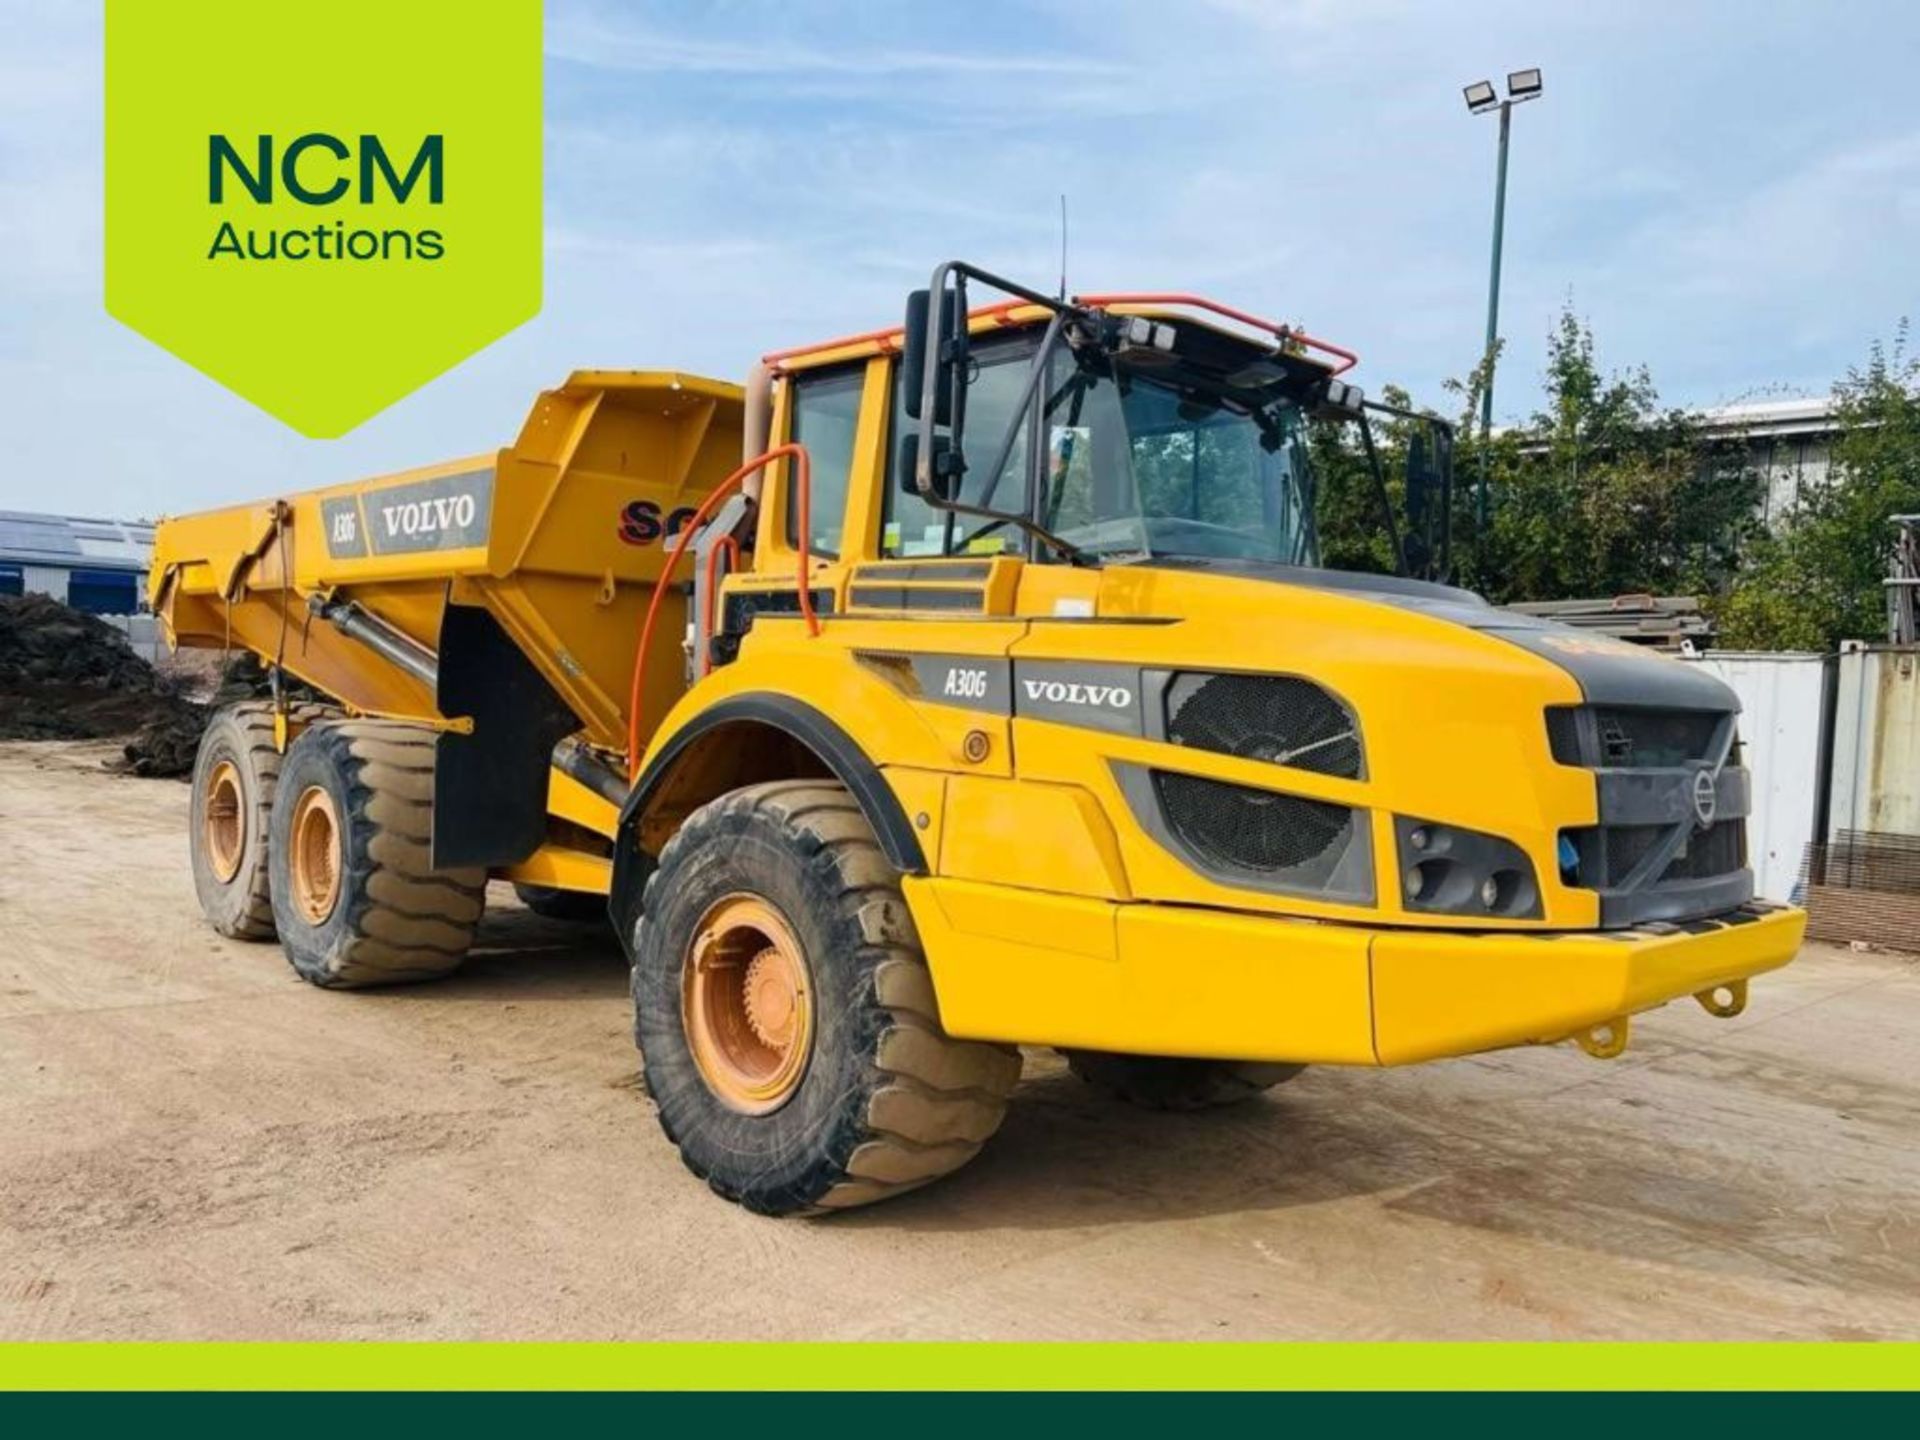 Sell your Plant, Machinery, Commercial Vehicles & Industrial Assets with NCM Auctions! - Bild 2 aus 2